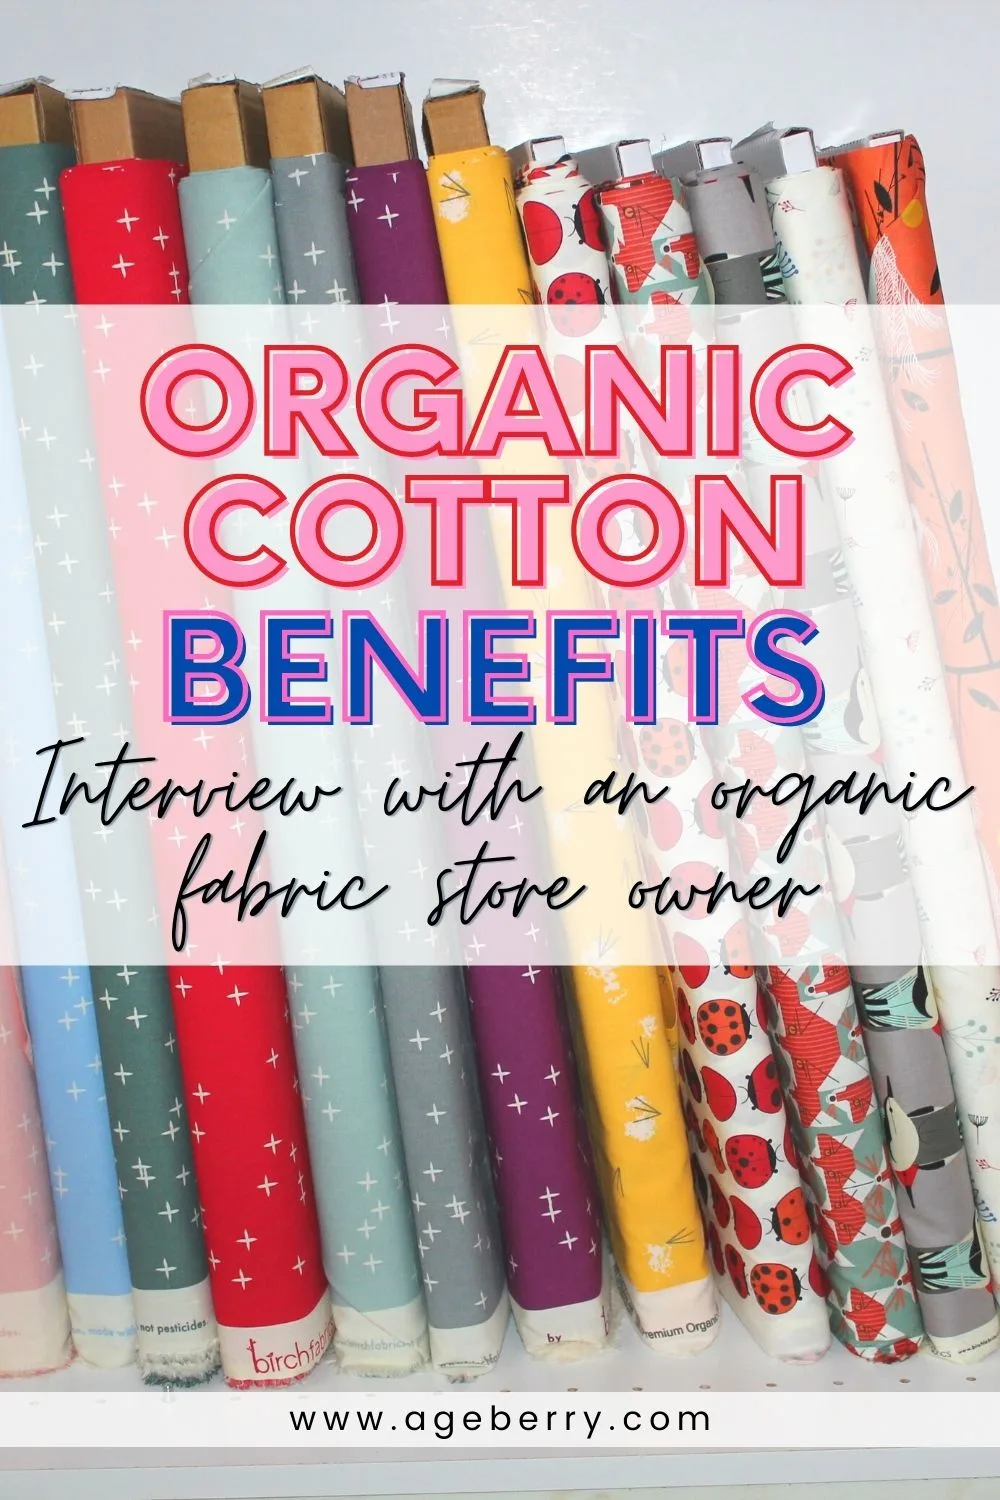 Organic cotton benefits Interview with an organic fabric store owner